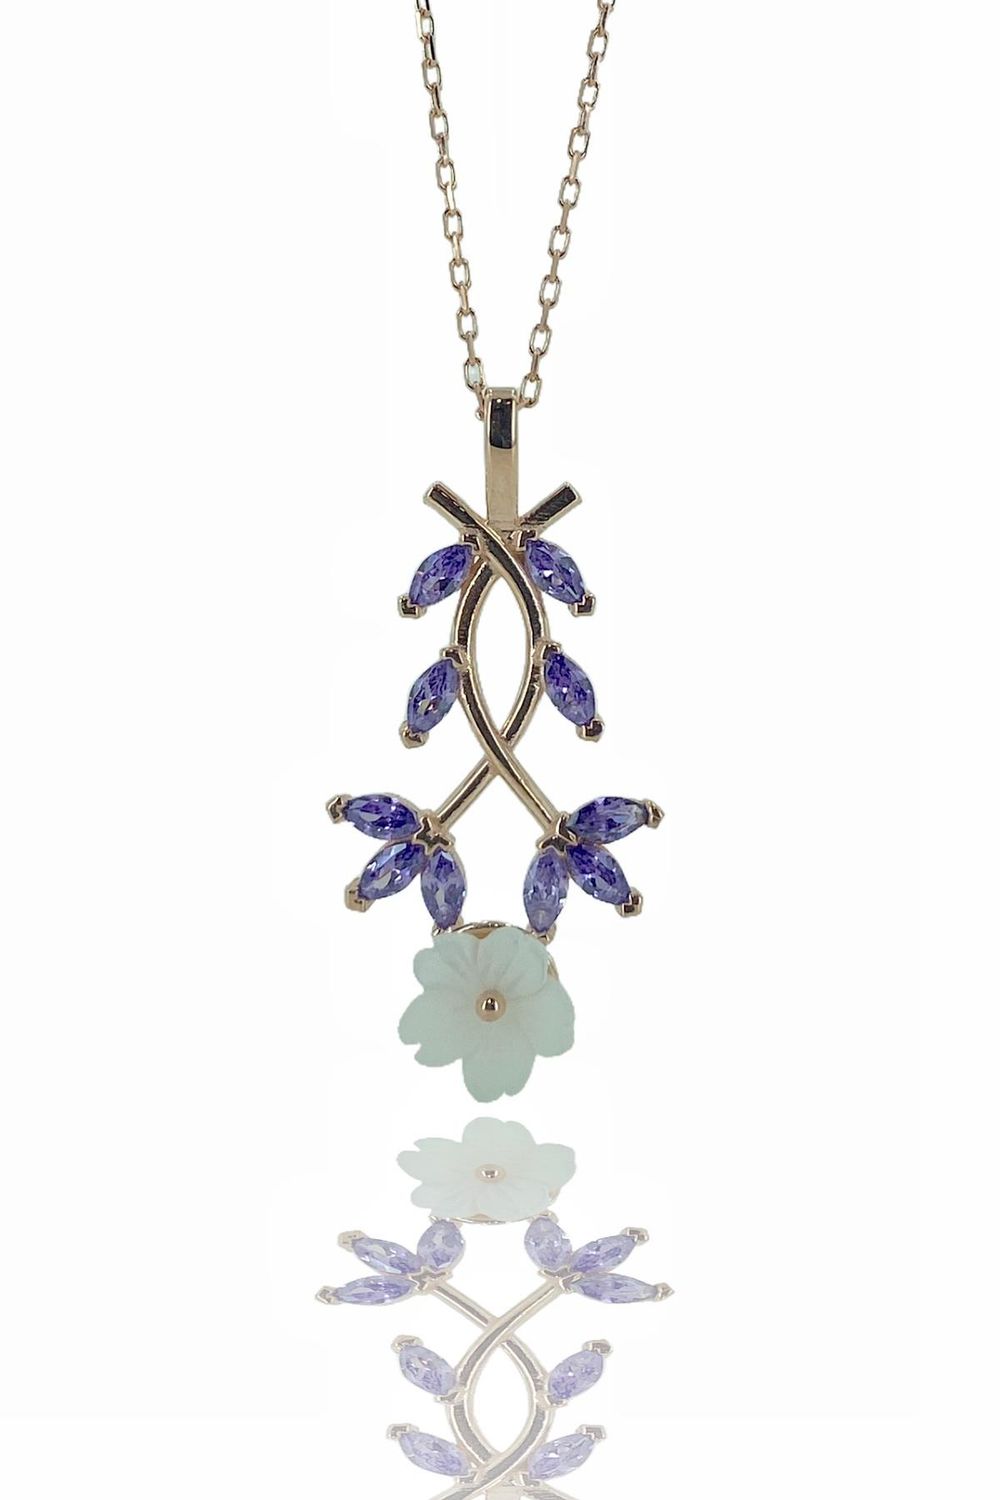 Amethyst Mother of Pearl Flowers Flower 925 Sterling Silver Necklace